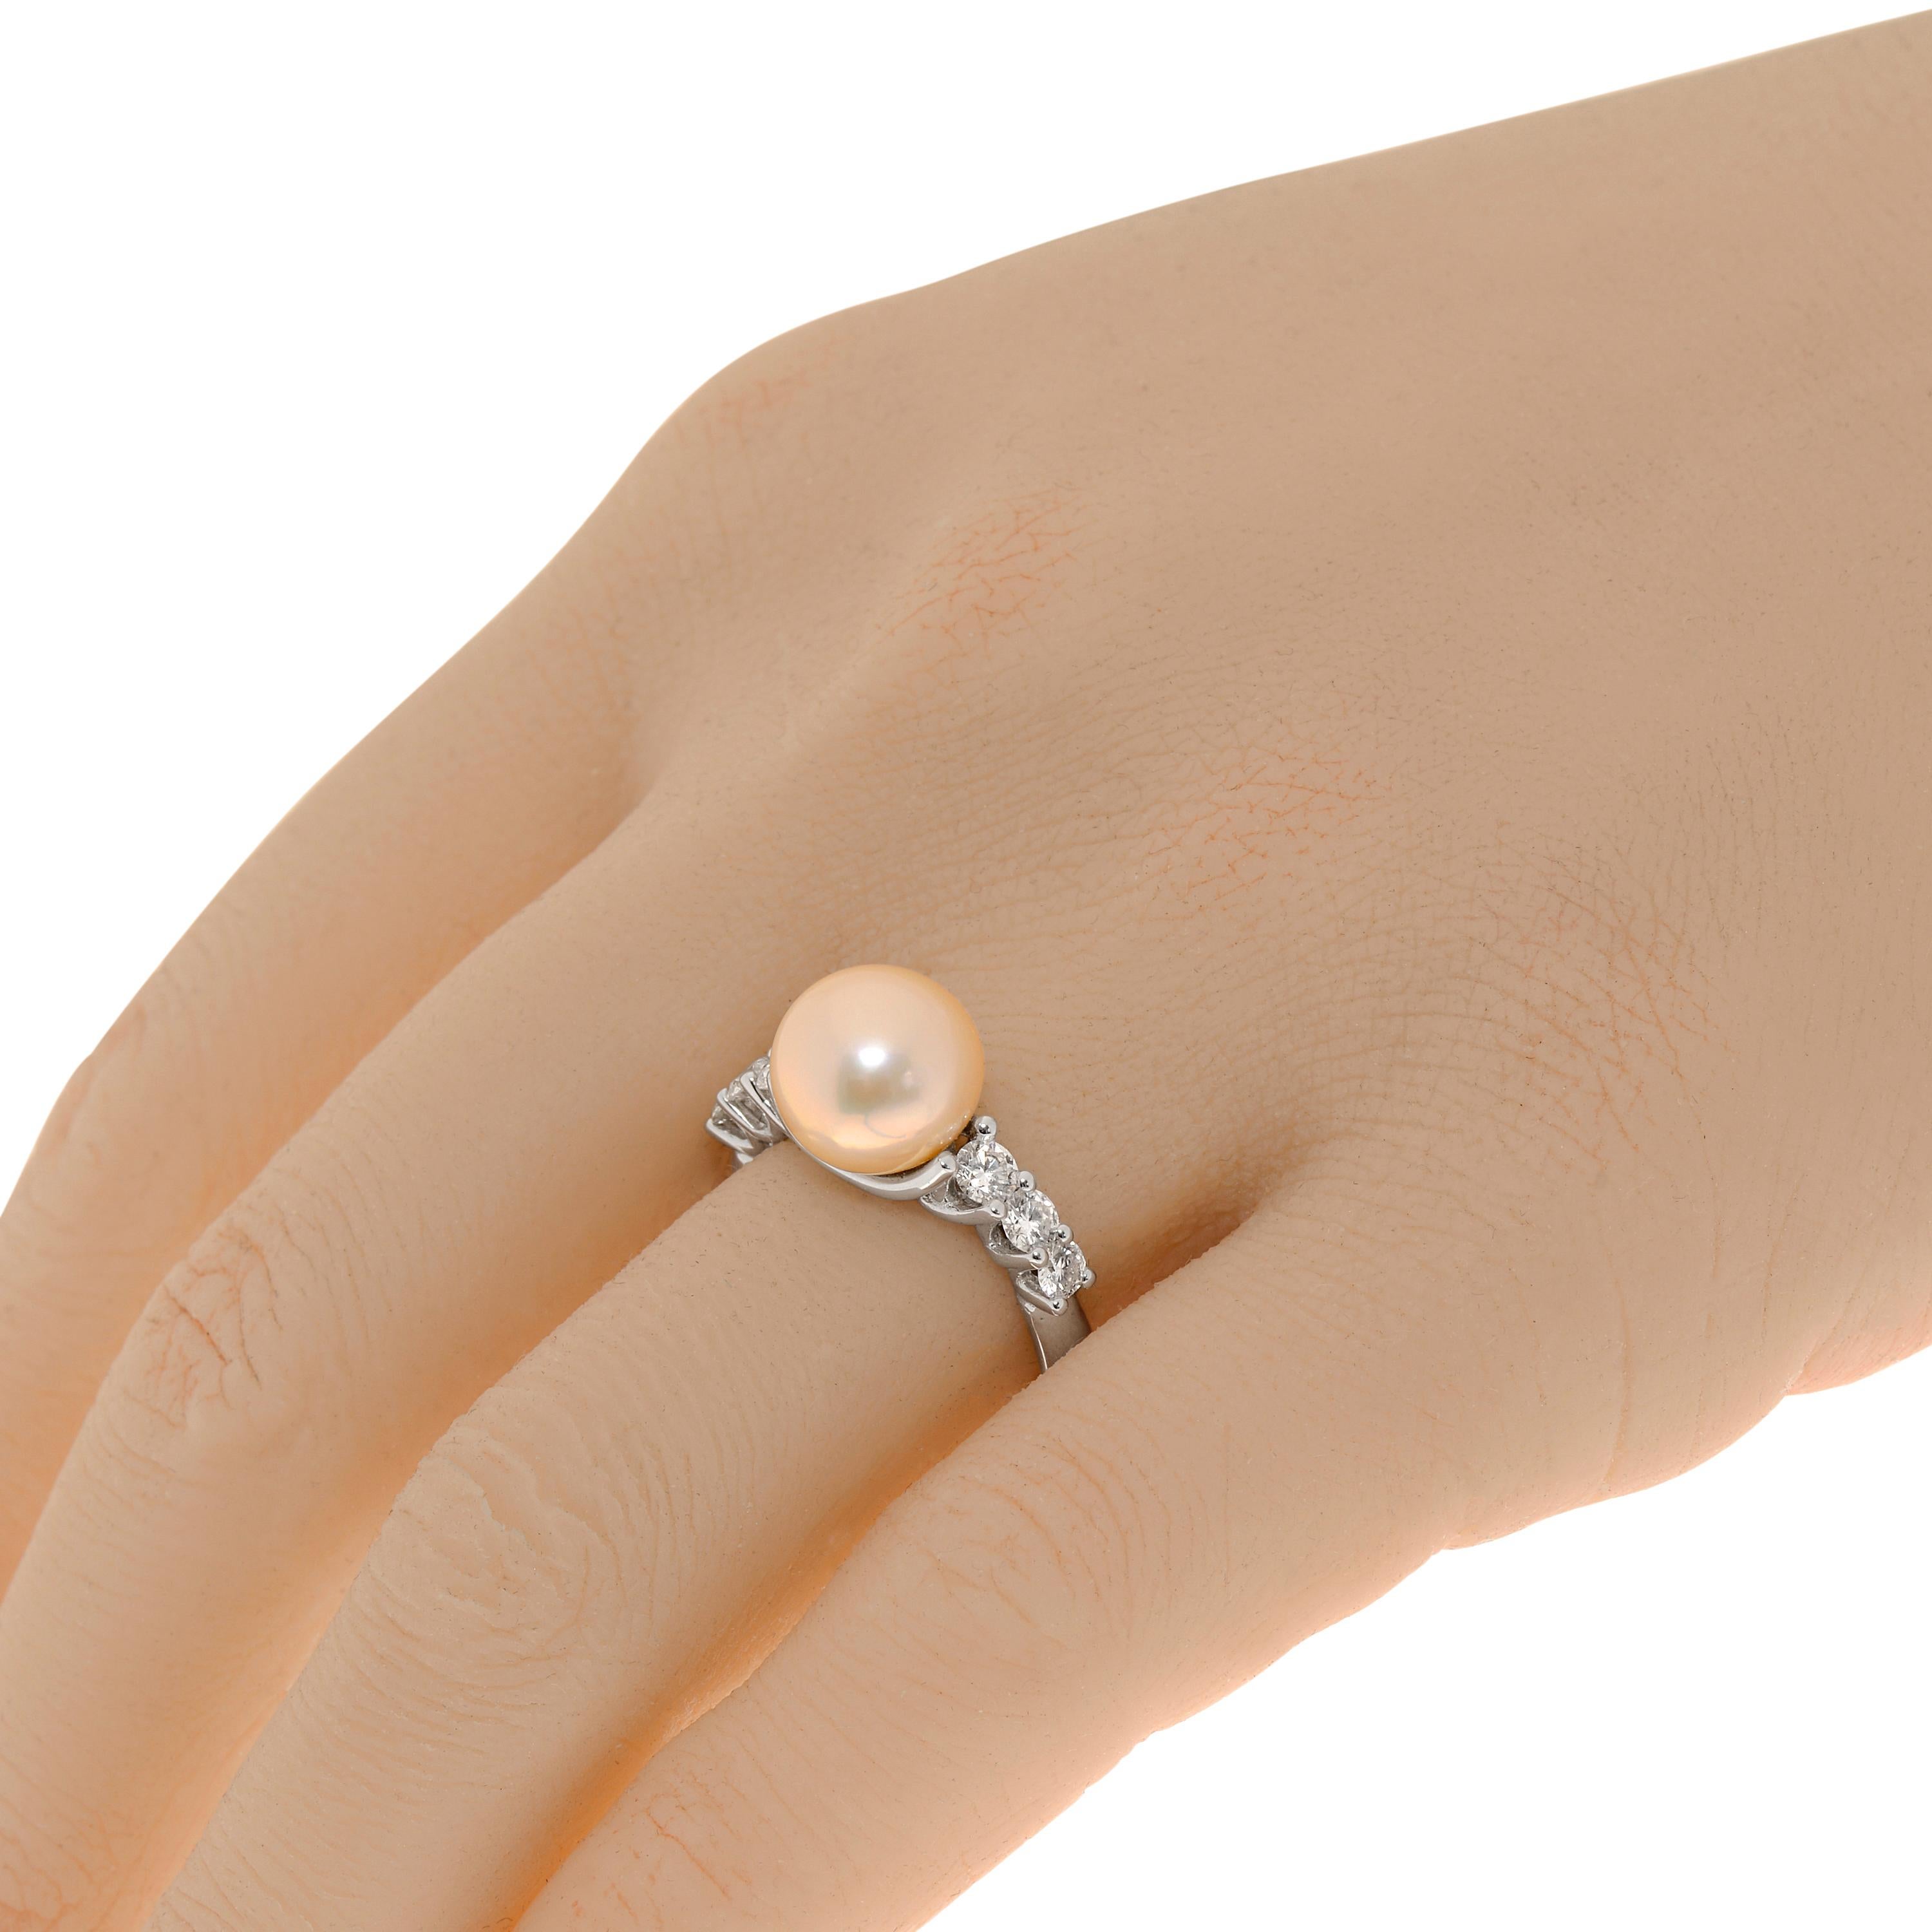 Zydo 18K white gold band ring features 0.57ct. tw. diamonds surrounding a 9.7mm pearl focal point. The ring size is 6.5 (53.1). The decoration size is 9.7mm x 9.7mm. The total weight is 5.6g.
